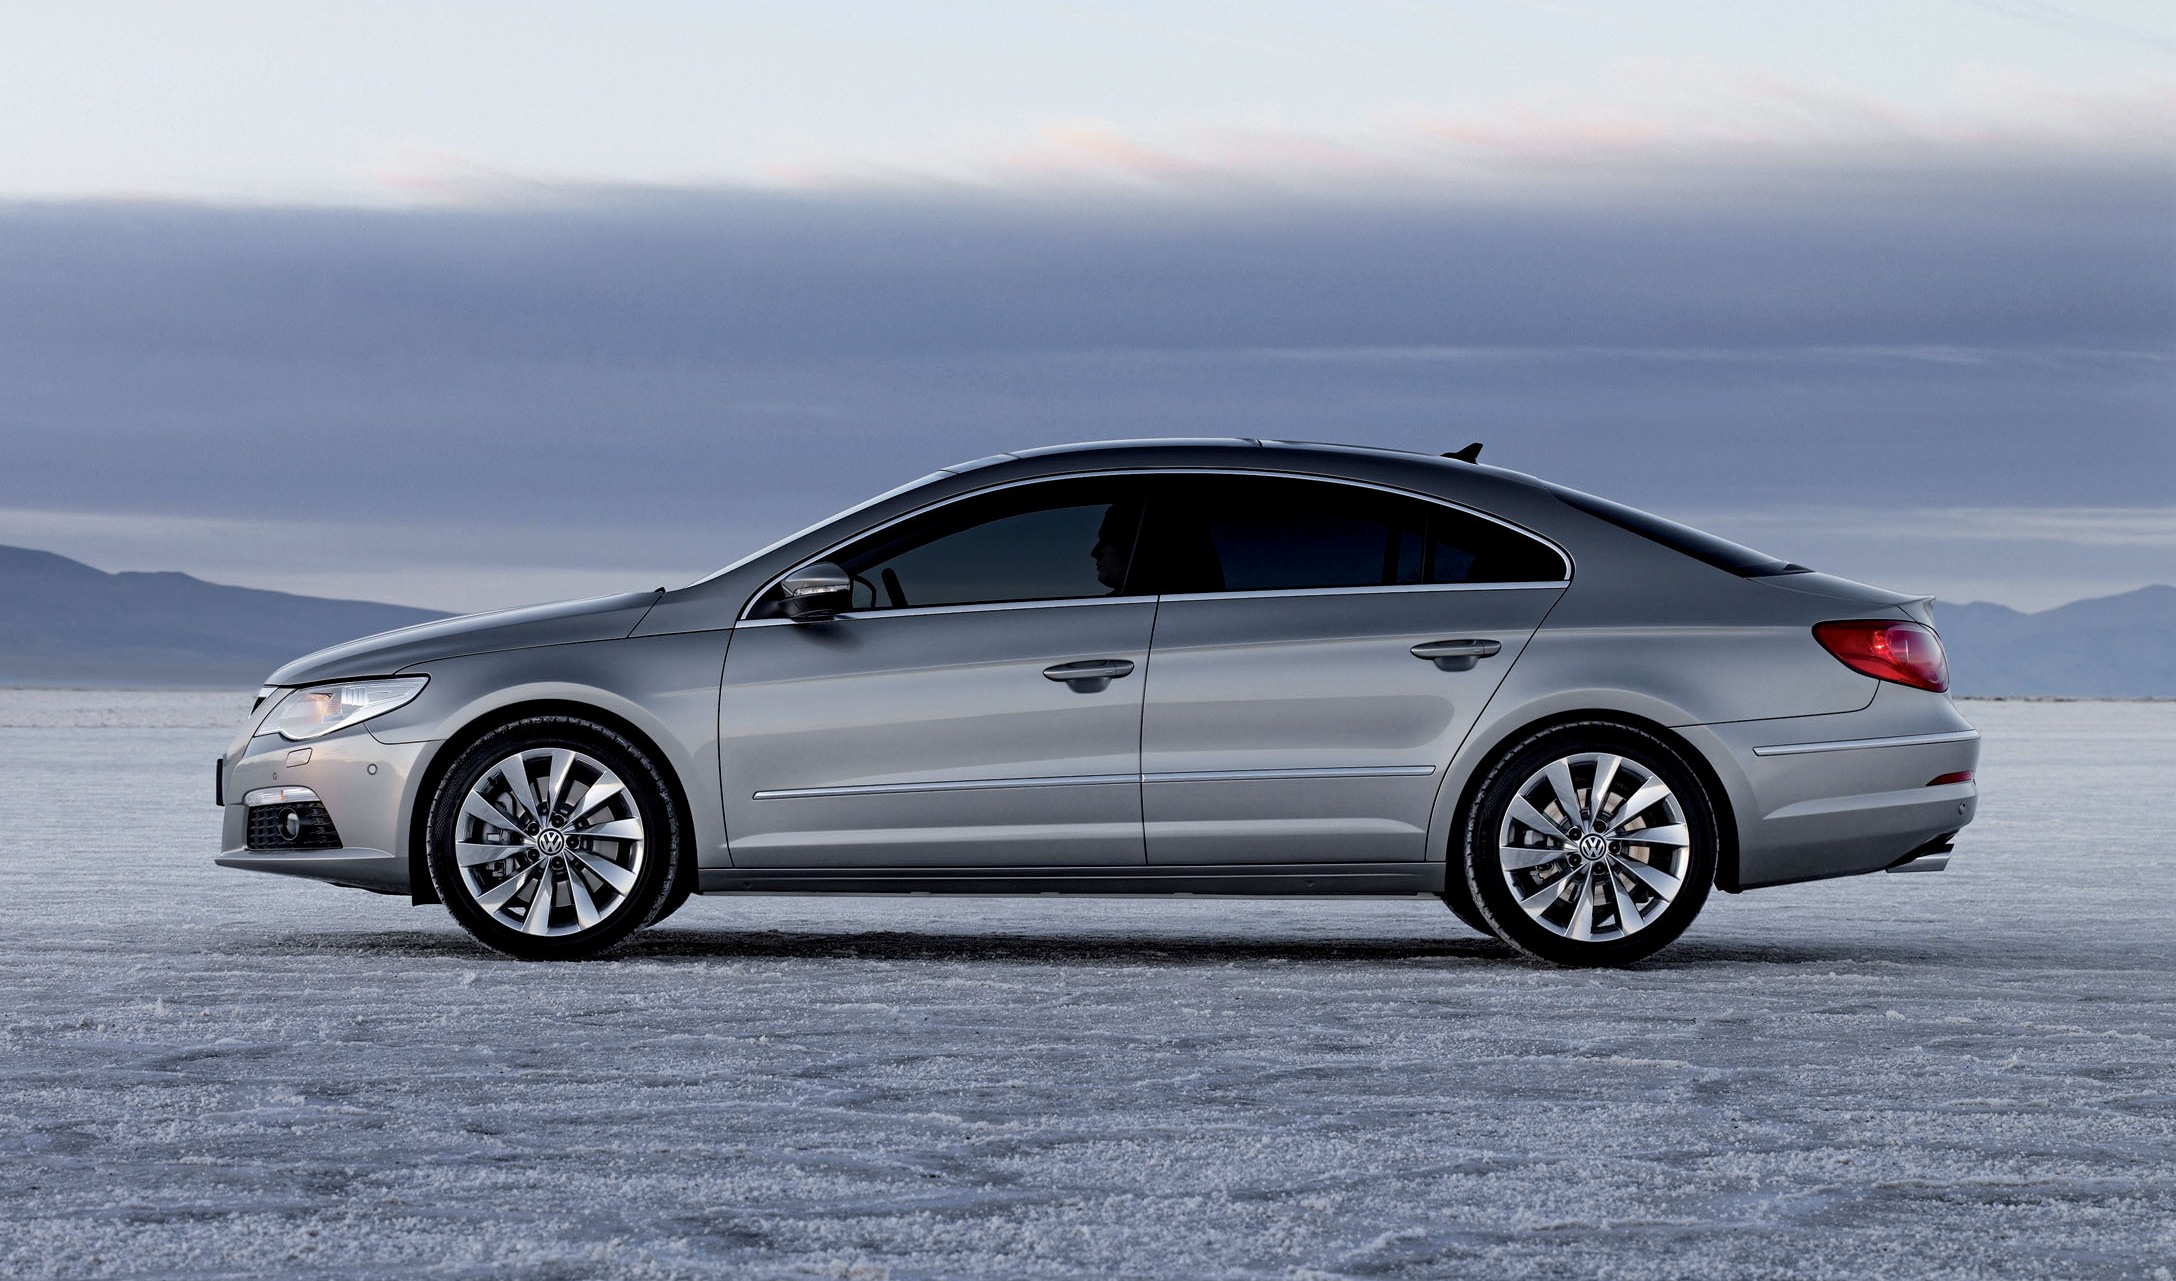 volkswagen, cars, side view, silver, silvery, 2009 volkswagen cc Free Stock Photo